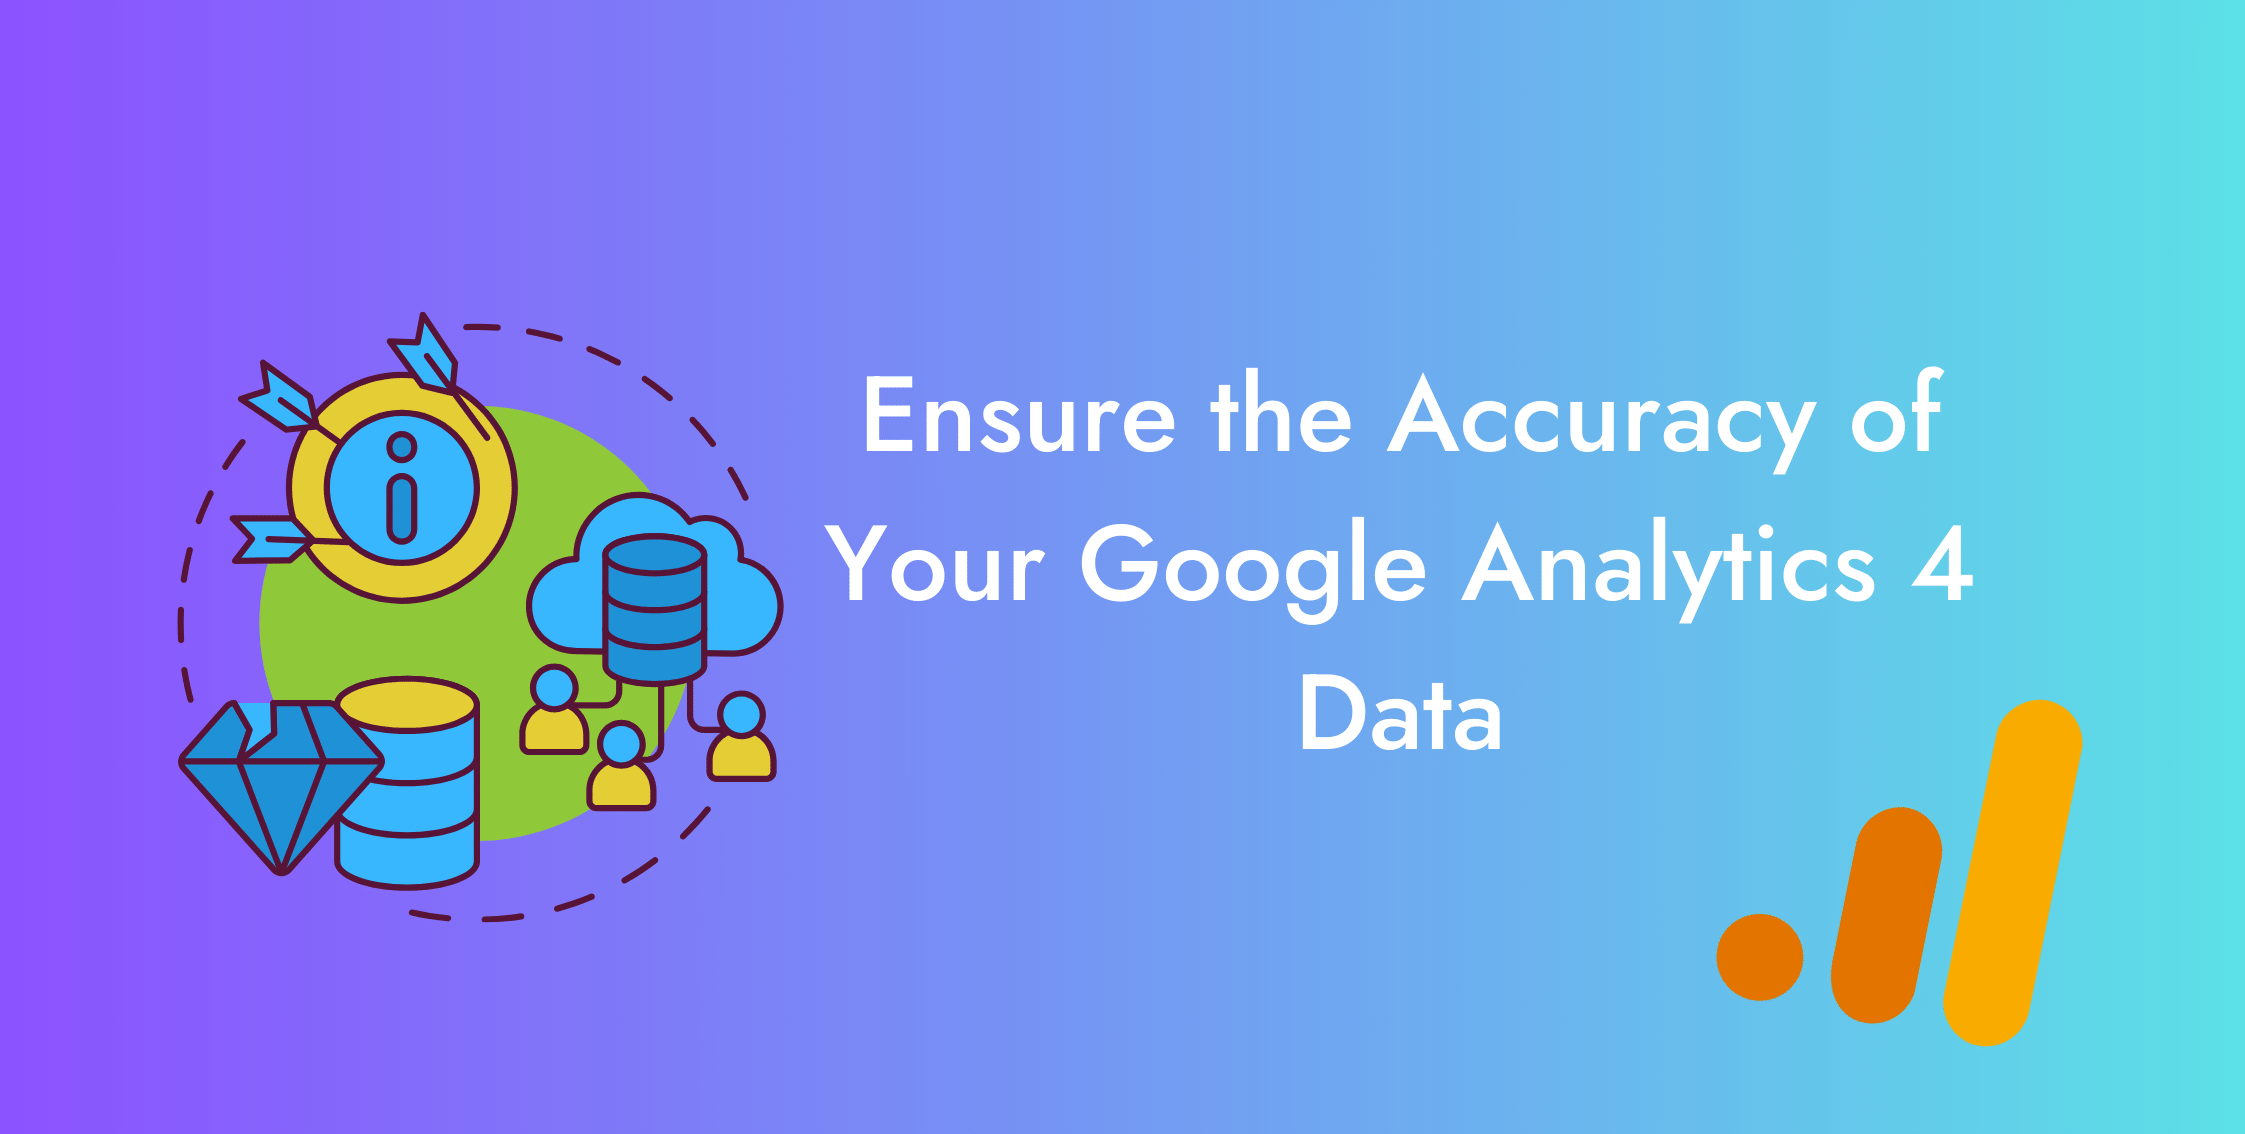 How To Ensure The Accuracy Of Your GA4 Data?